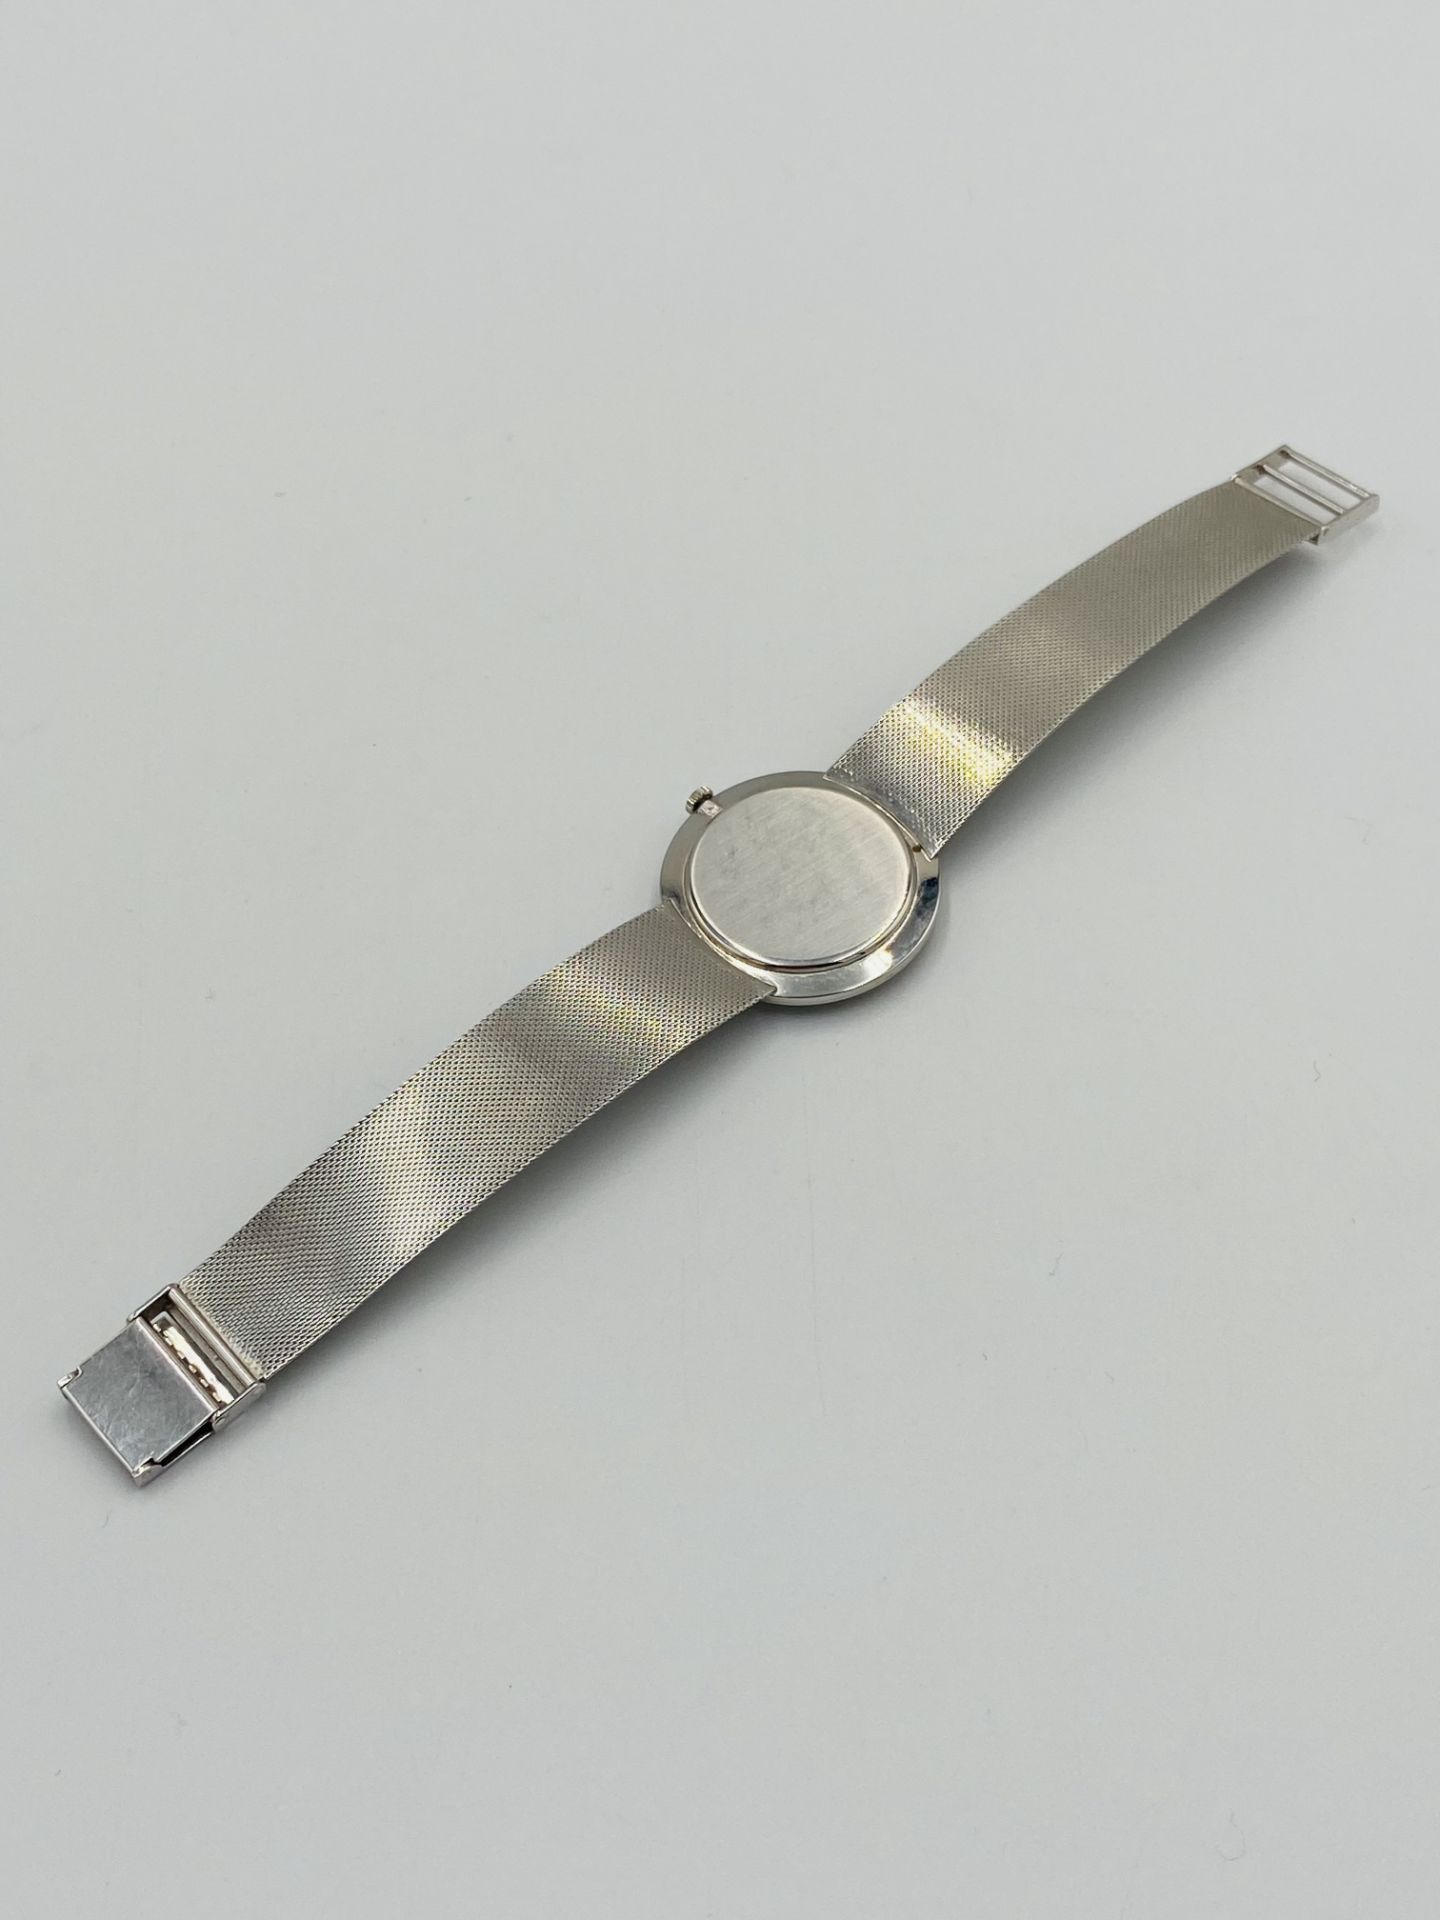 Sarcar Geneve wristwatch with 18ct gold strap - Image 5 of 7